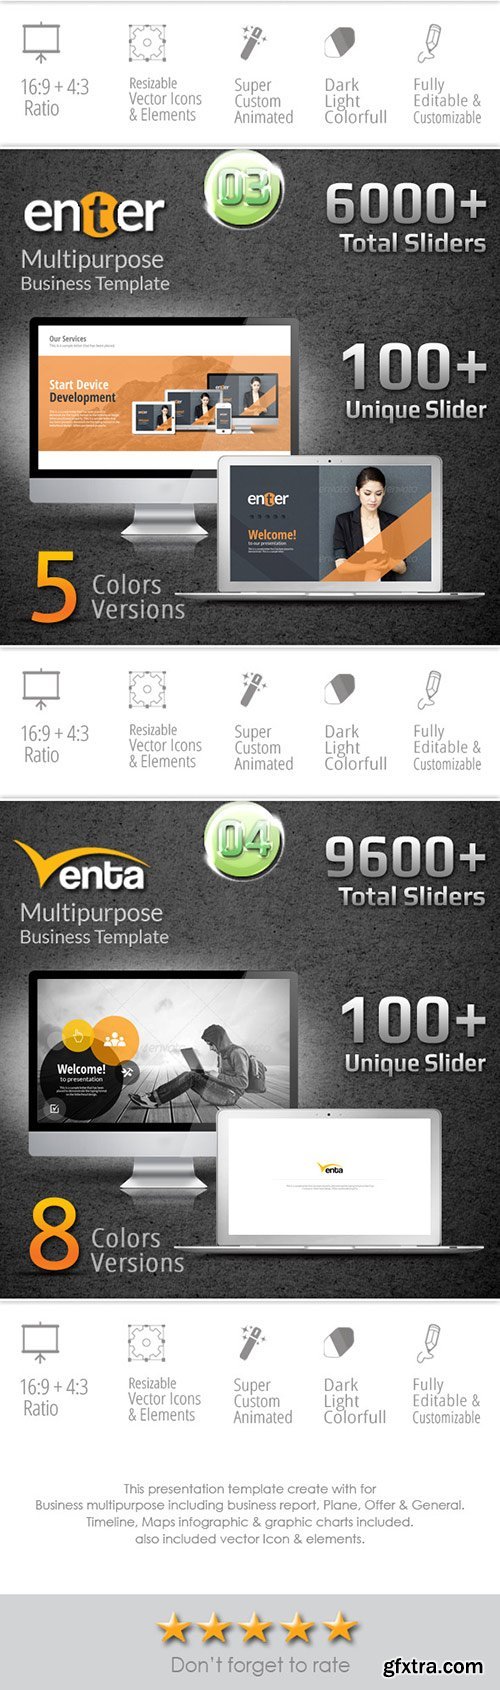 GraphicRiver - 4 in 1 Business PowerPoint Bundle 10356358